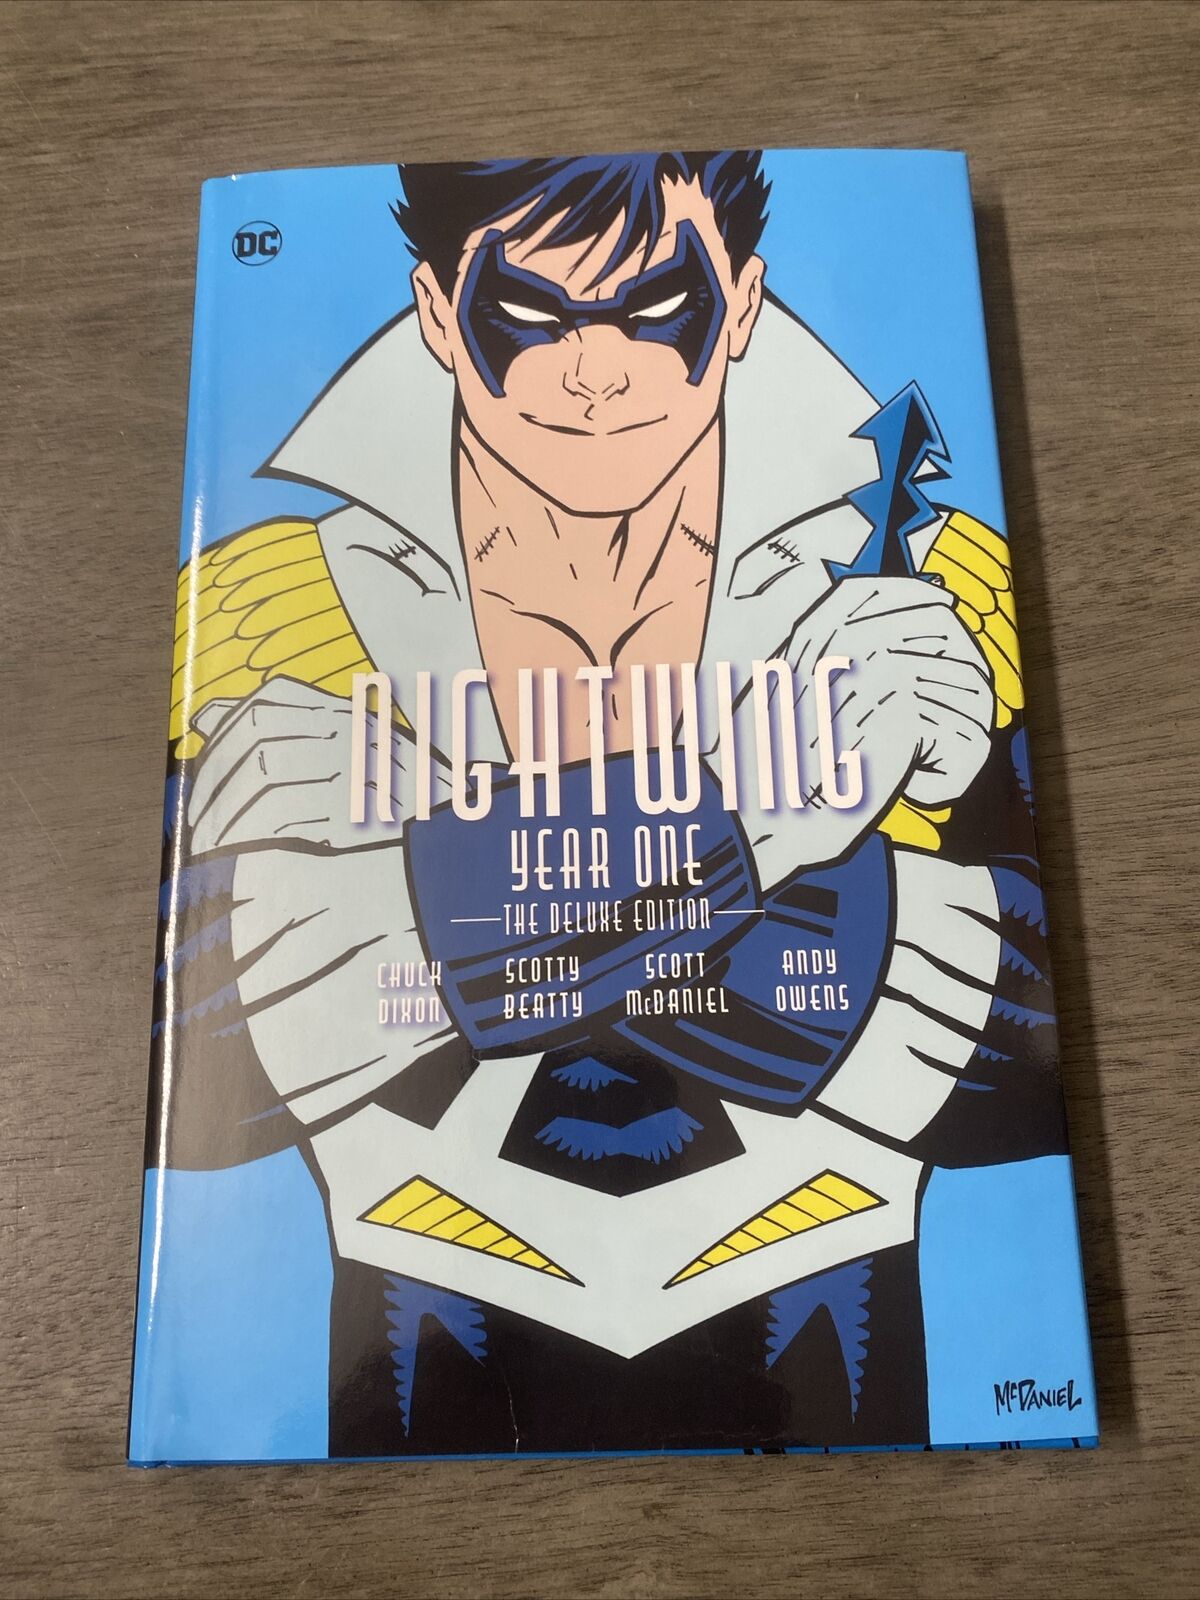 Nightwing: Year One the Deluxe Edition (DC Comics August 2020)